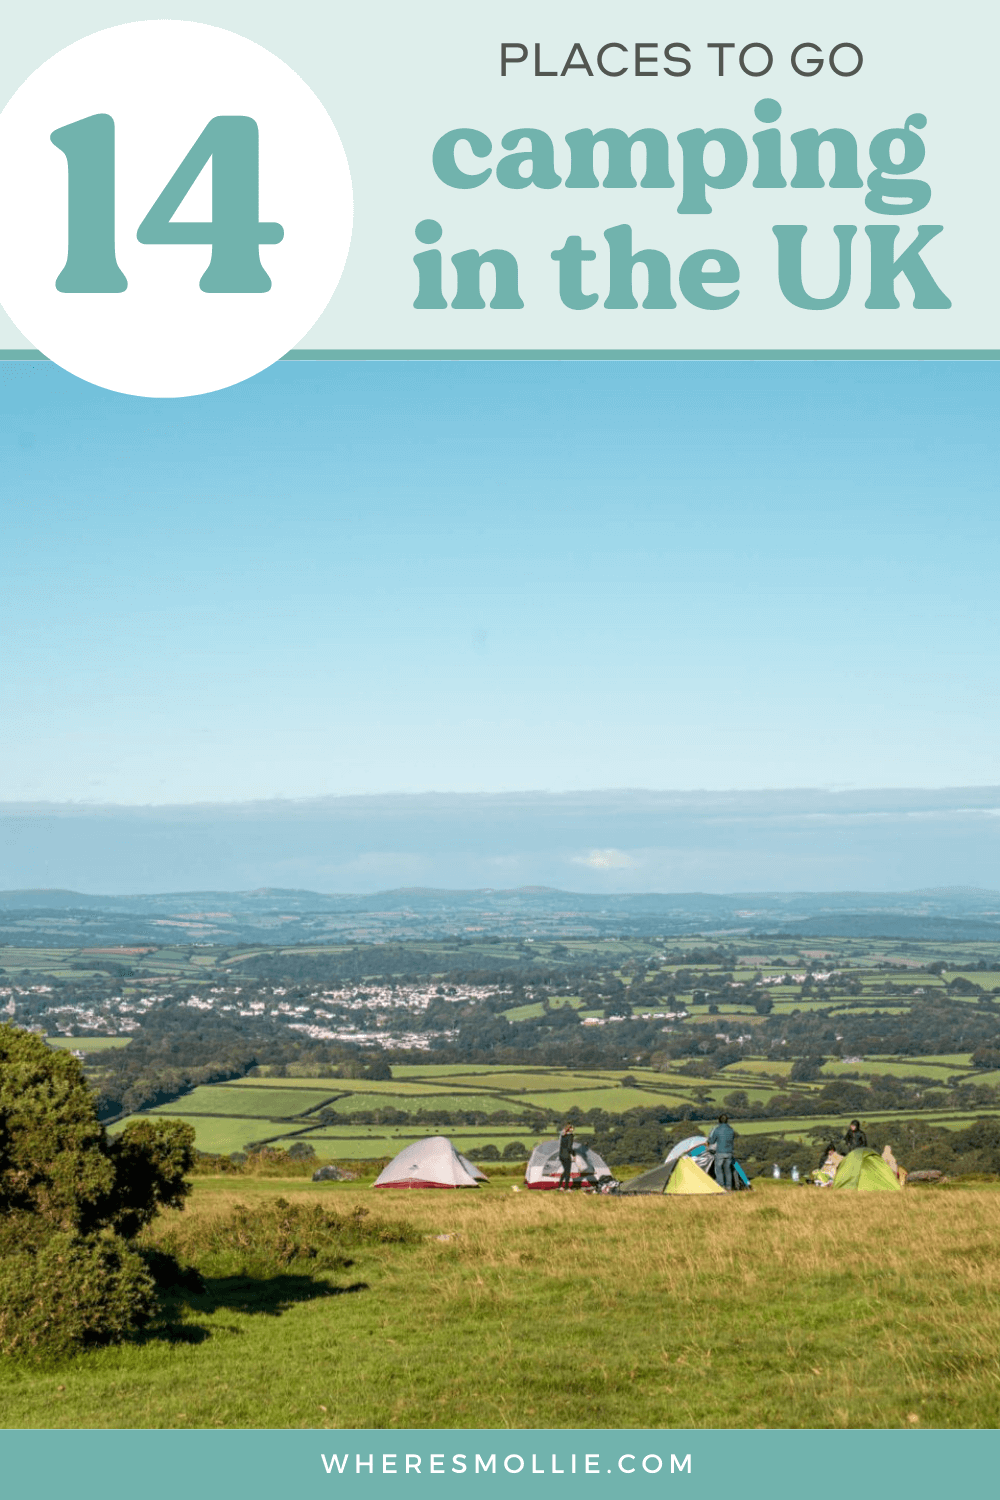 The best places to go camping in the UK